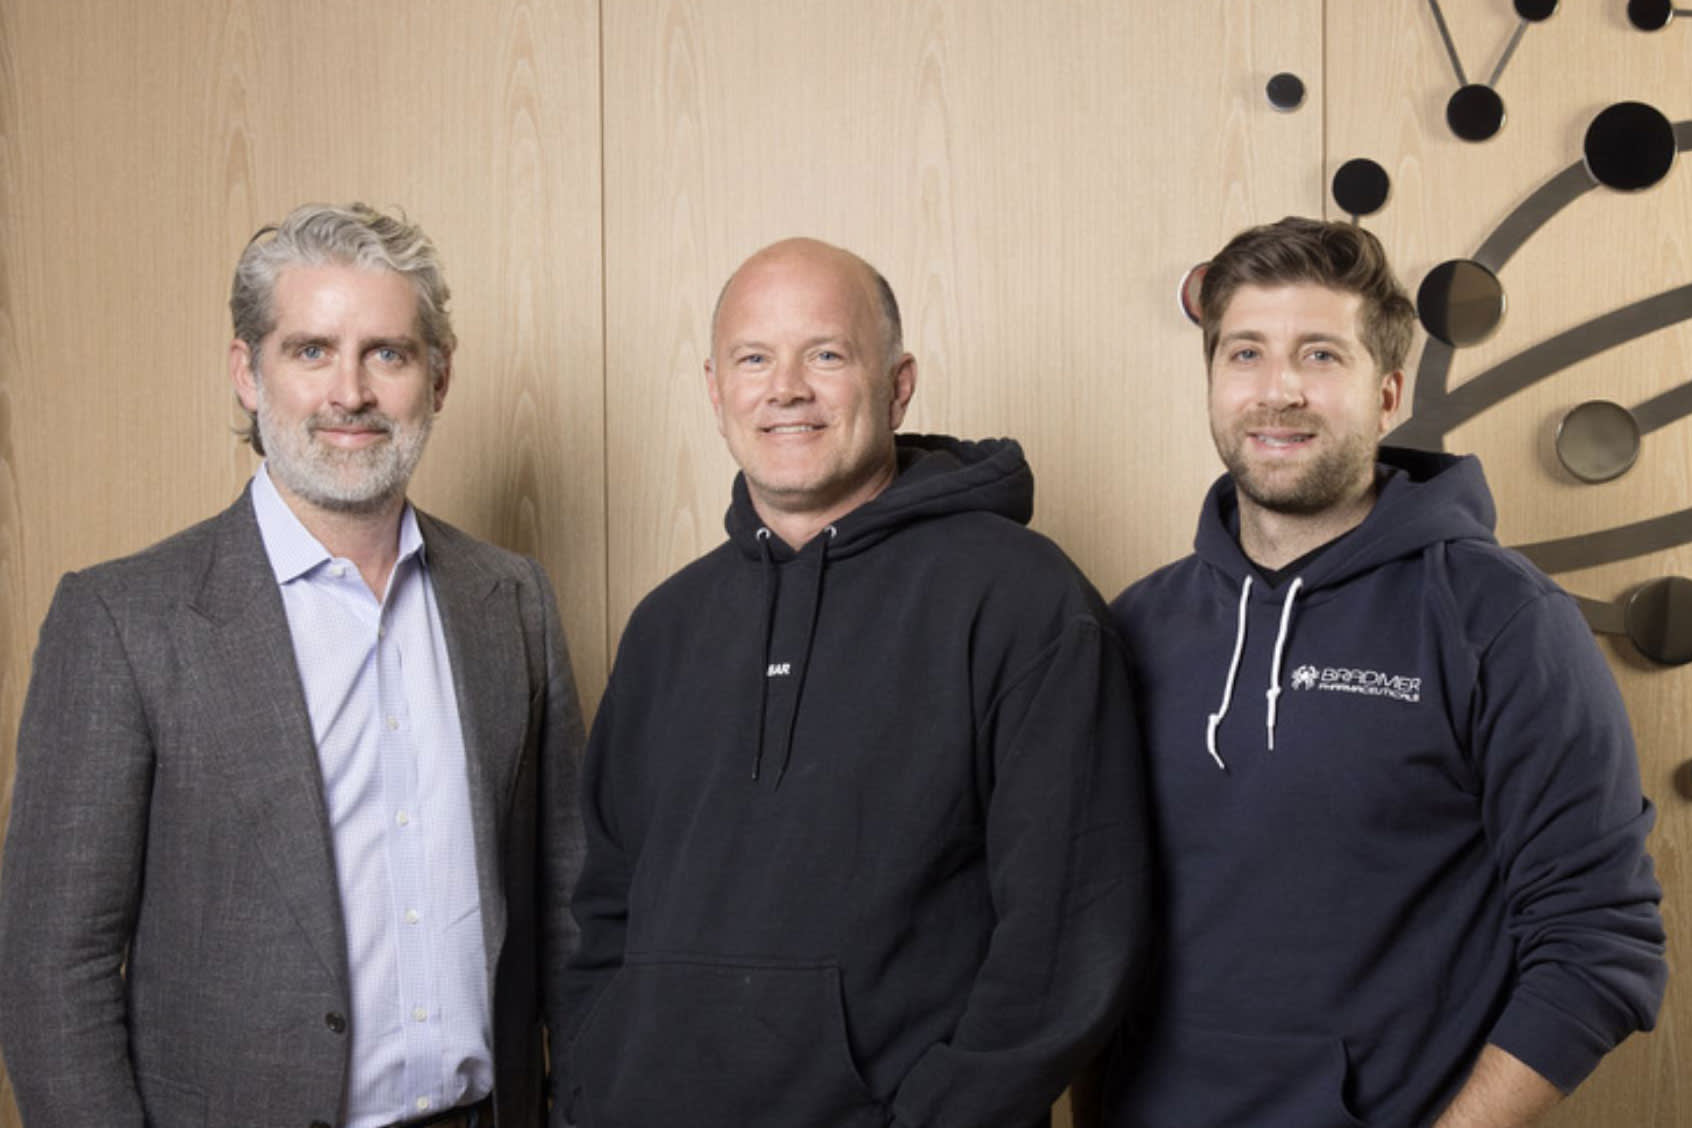 Goldman Sachs ramps up buying and selling in partnership with Mike Novogratz’ Galaxy Digital